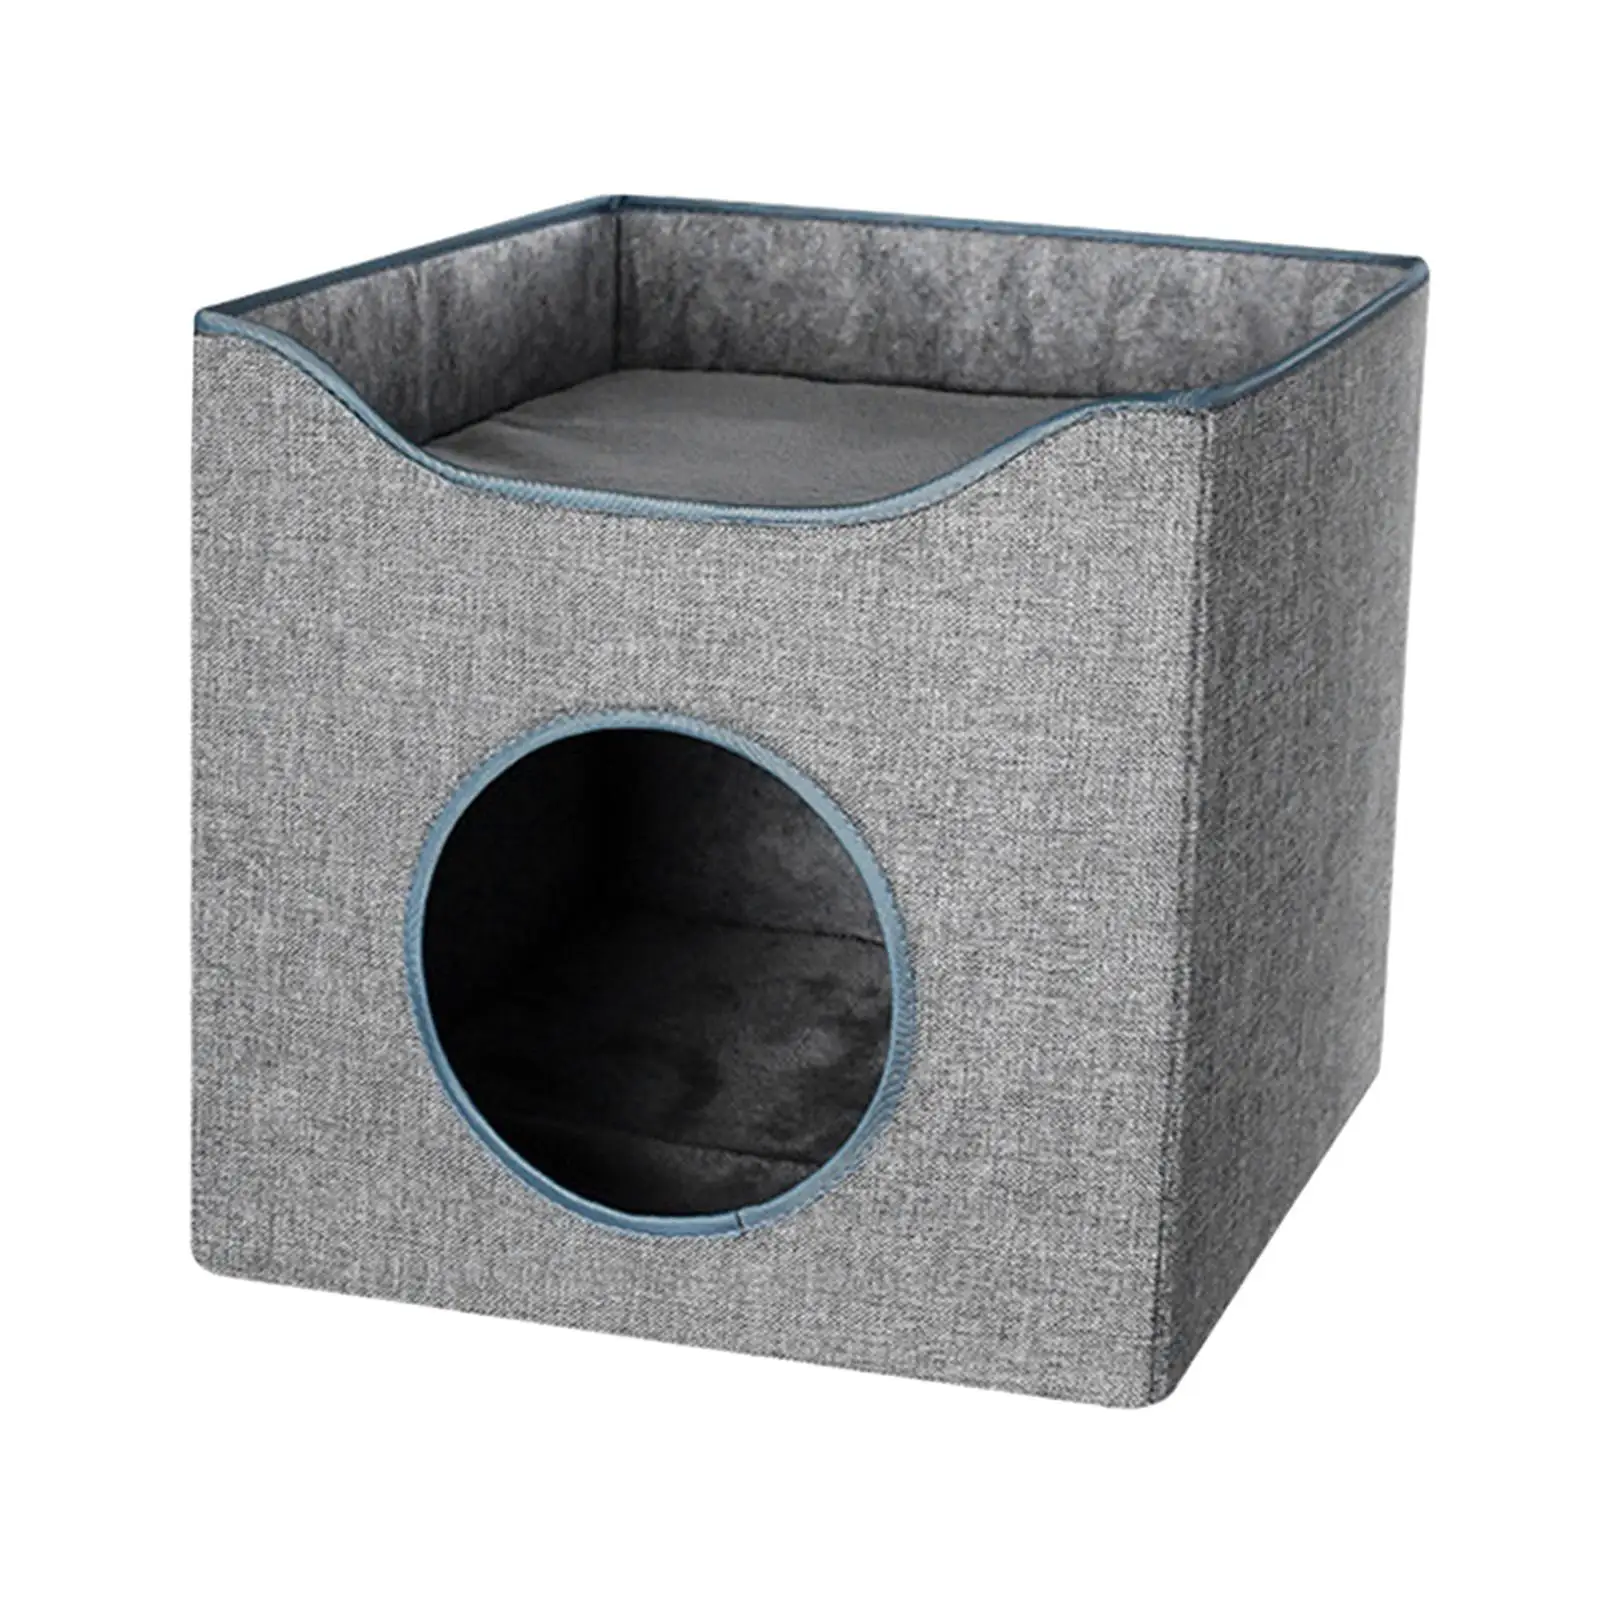 Pet Cat Bed Nest Dog House Universal Double Layer Foldable Warm Comfortable Winter Sleeping Bed Cave Puppy Kennel Pet Supplies